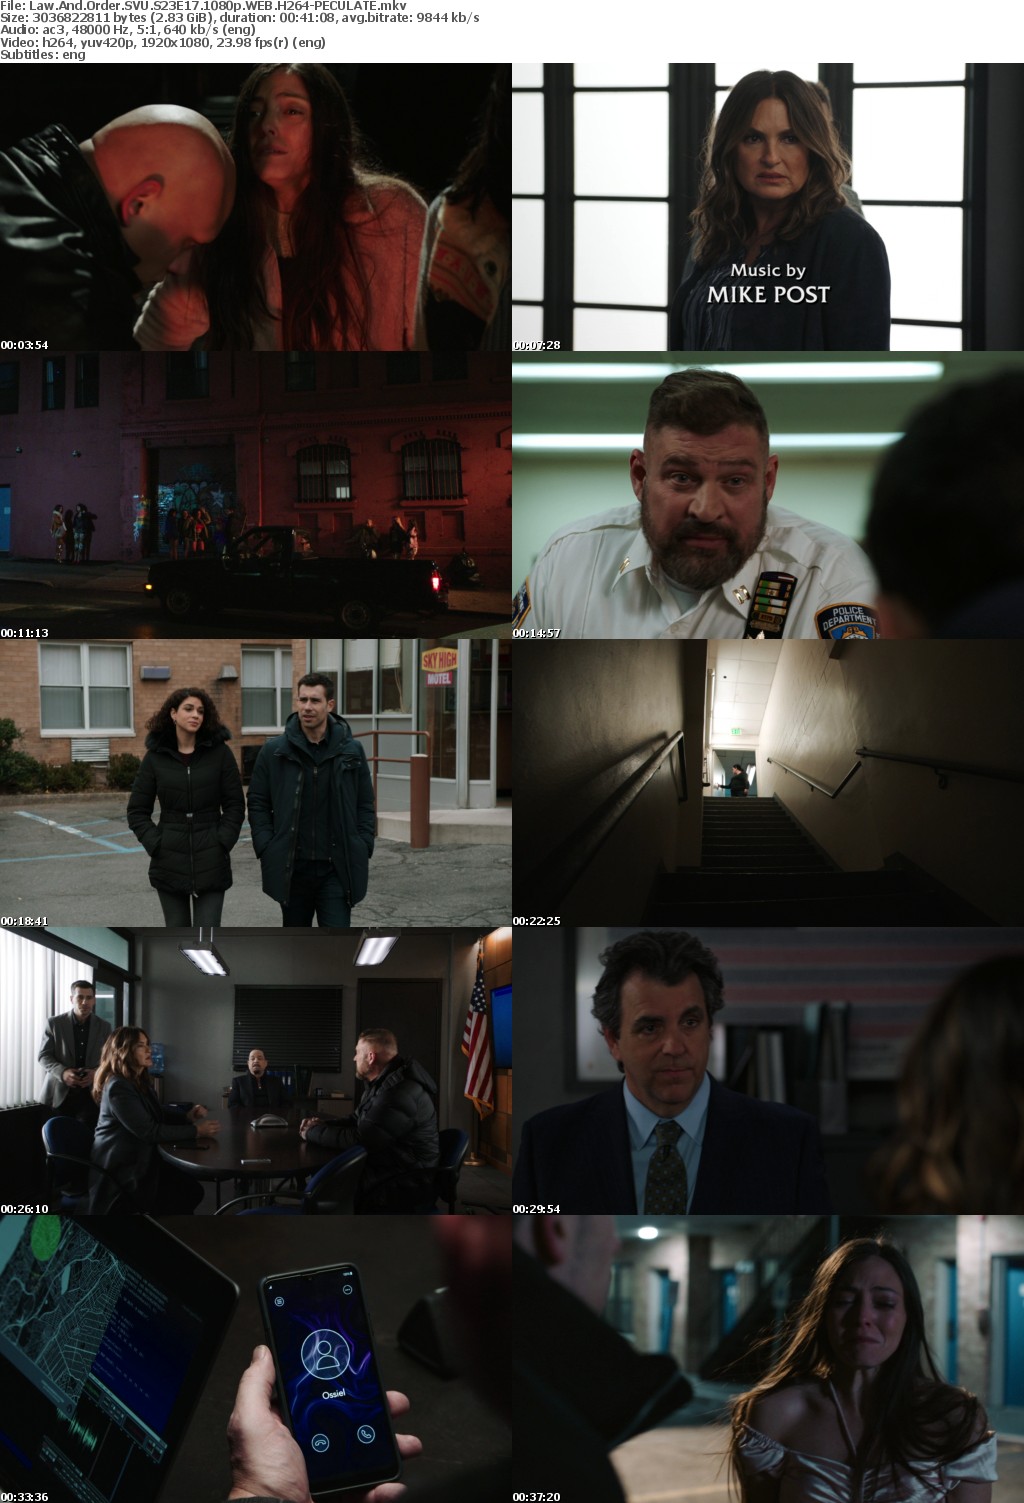 Law And Order SVU S23E17 1080p WEB H264-PECULATE